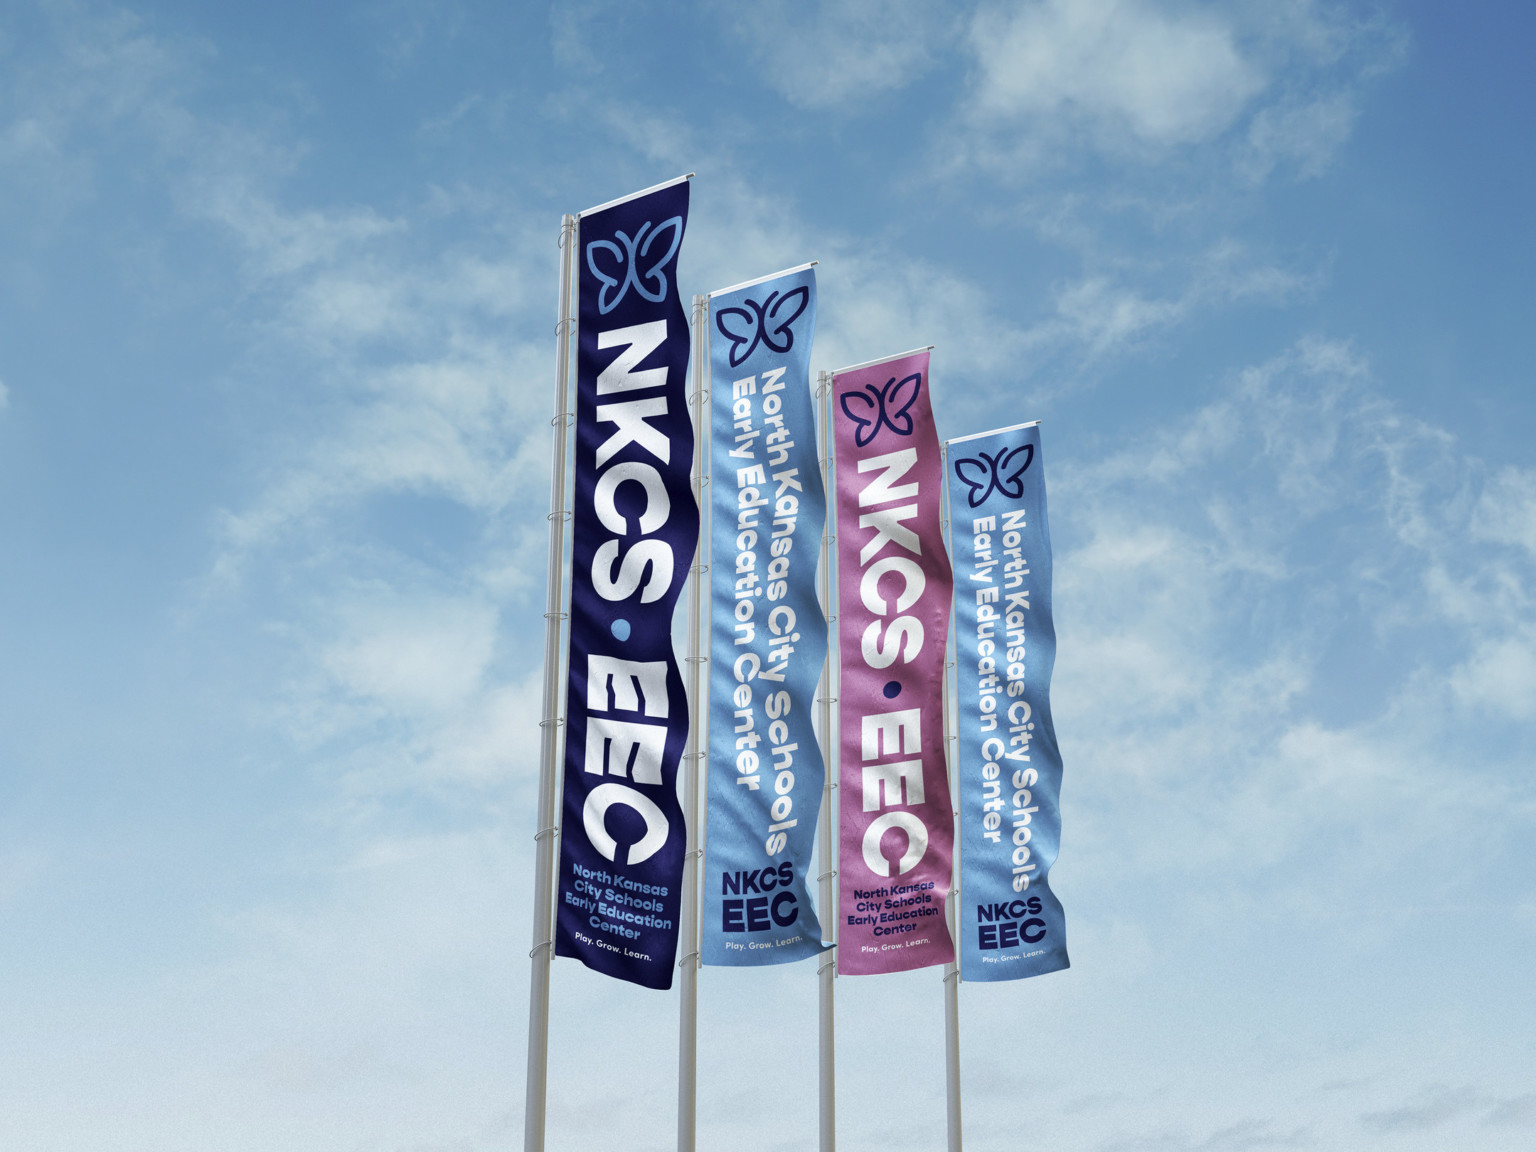 4 blue and purple vertical banners with white lettering against a blue sky